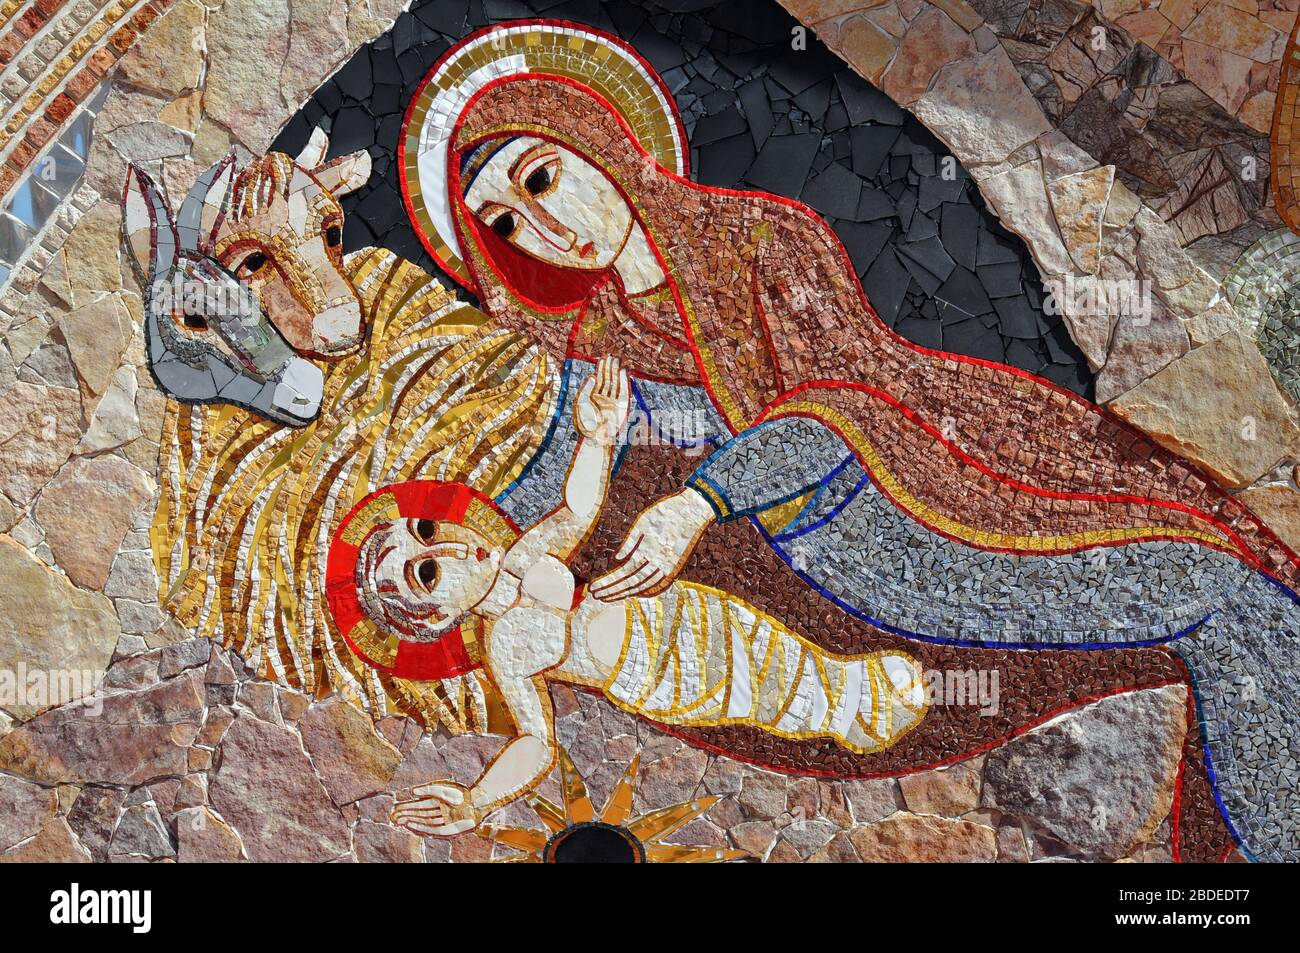 Detail of mosaics showing Biblical scenes at the Ta' Pinu National Shrine on the island of Gozo, Malta. The mosaics were completed in 2017. Stock Photo